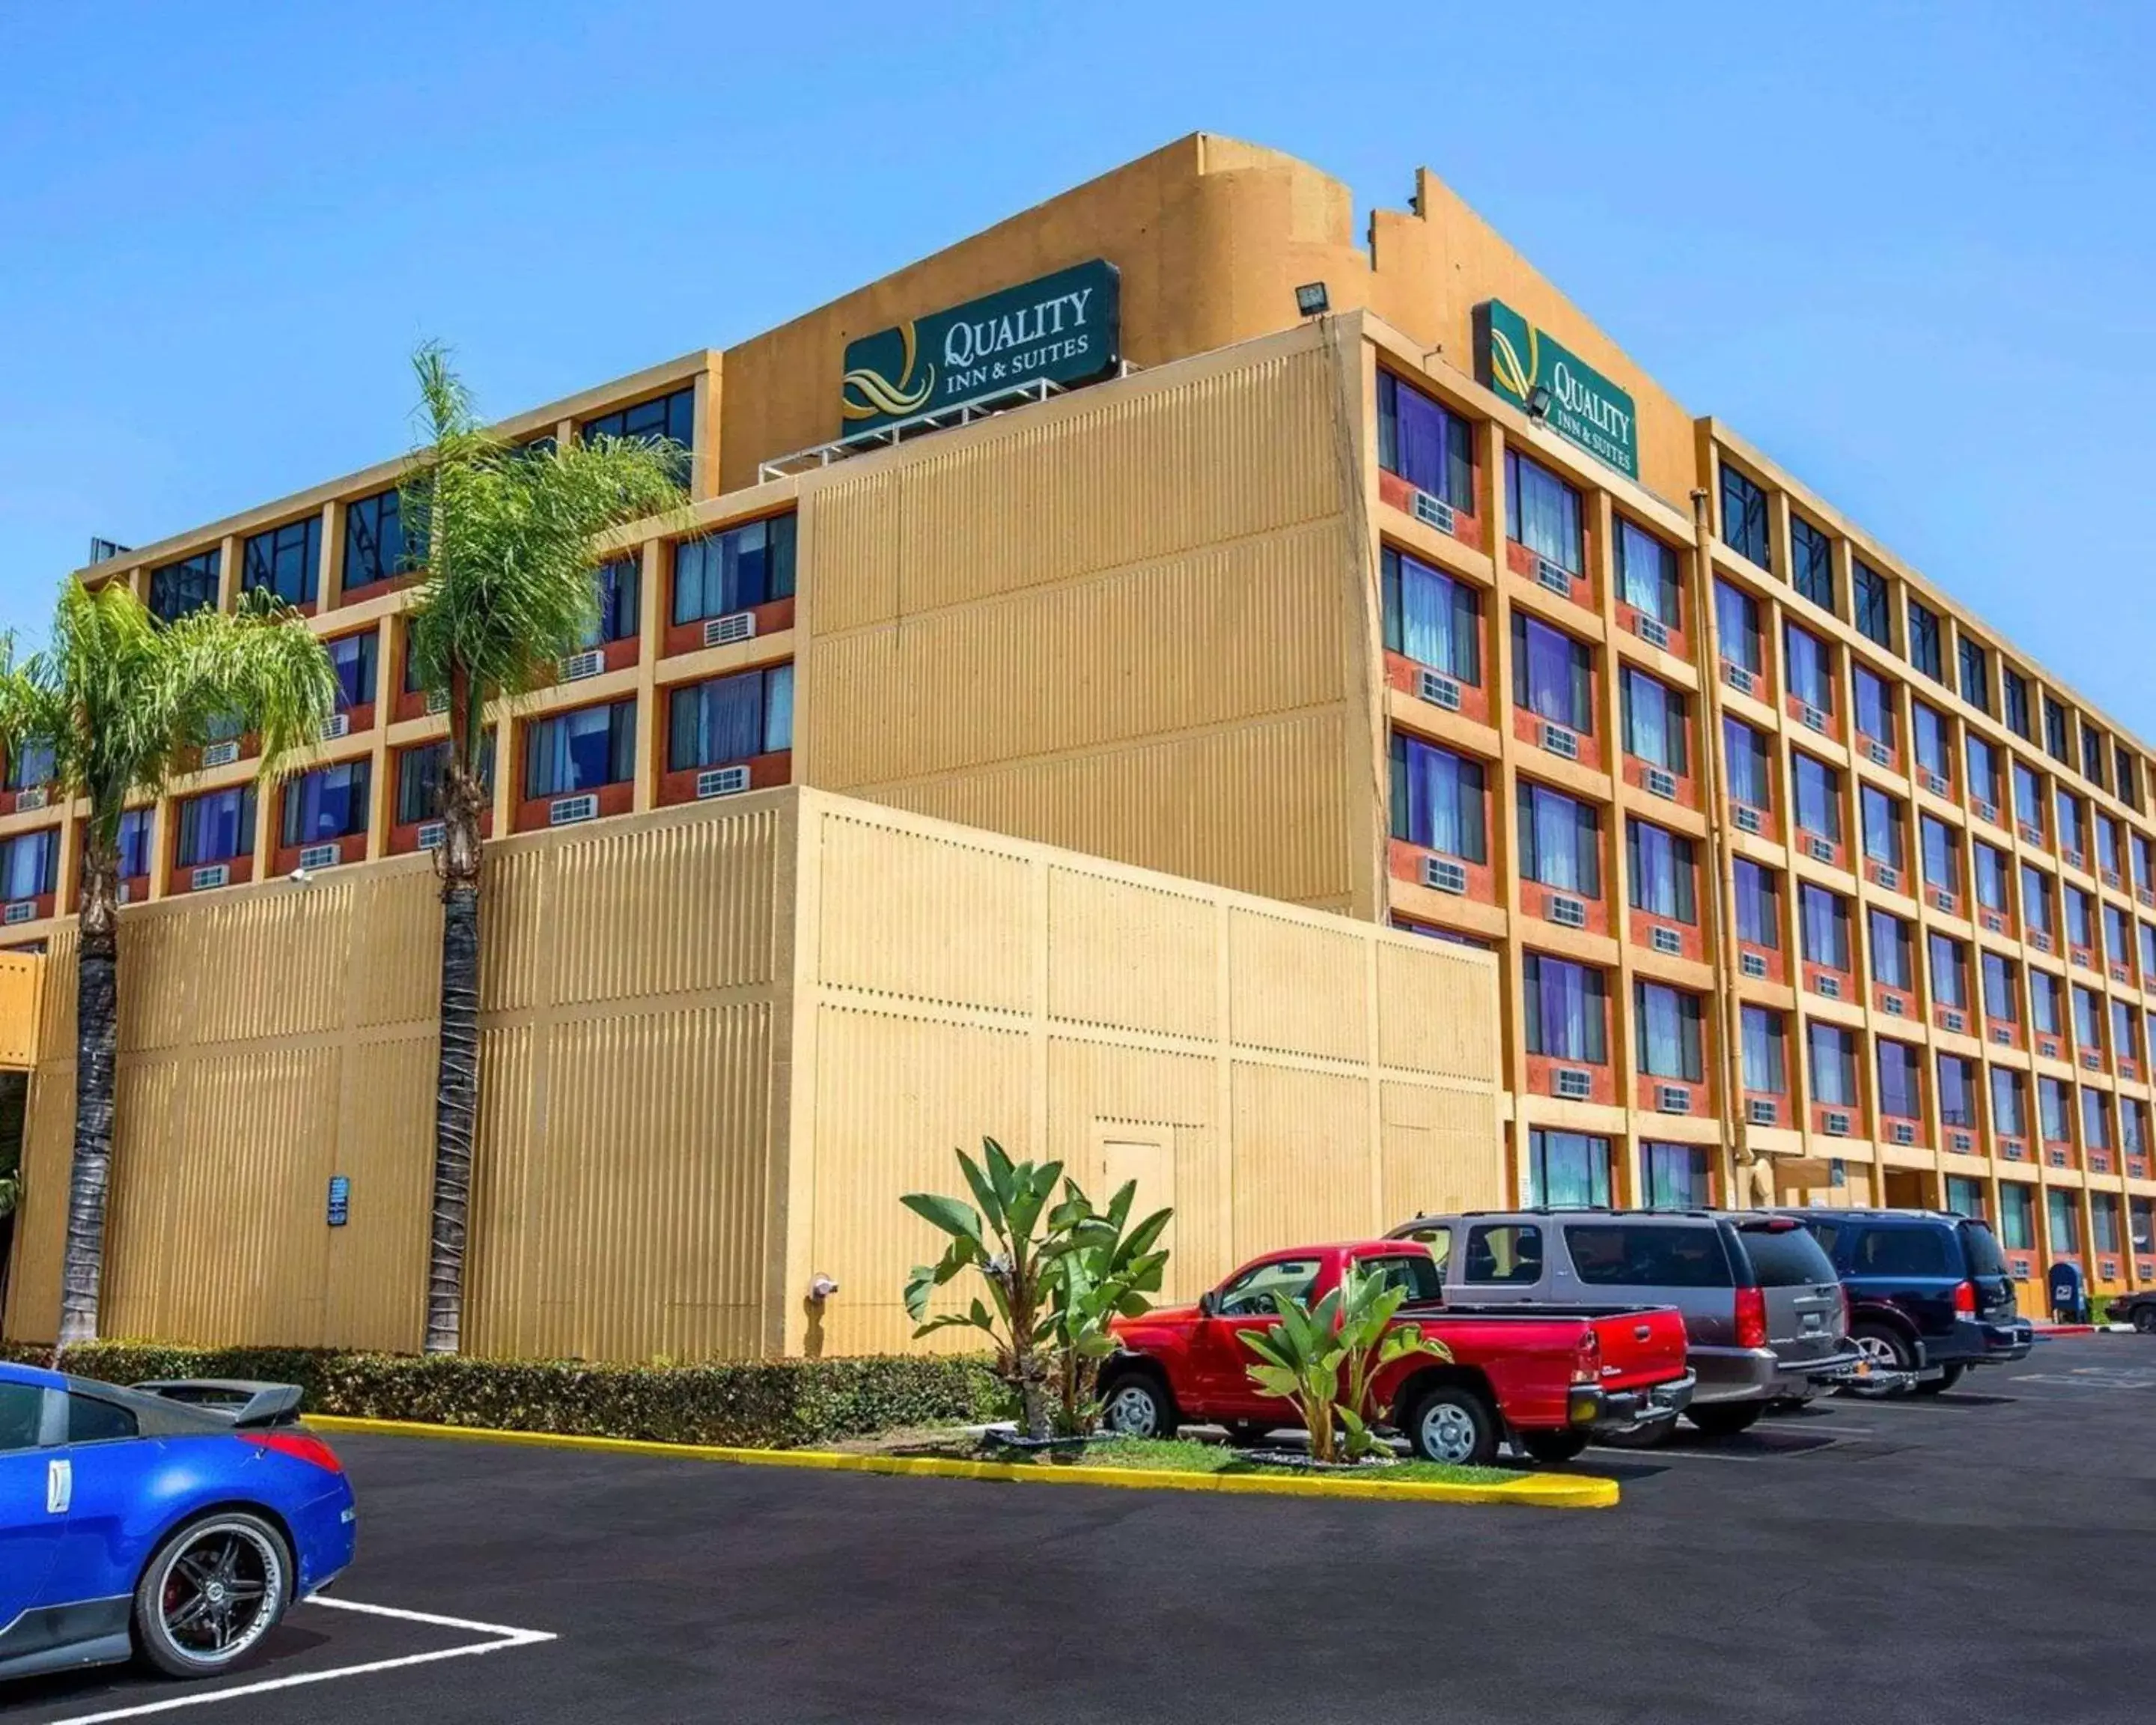 Property Building in Quality Inn & Suites Montebello - Los Angeles